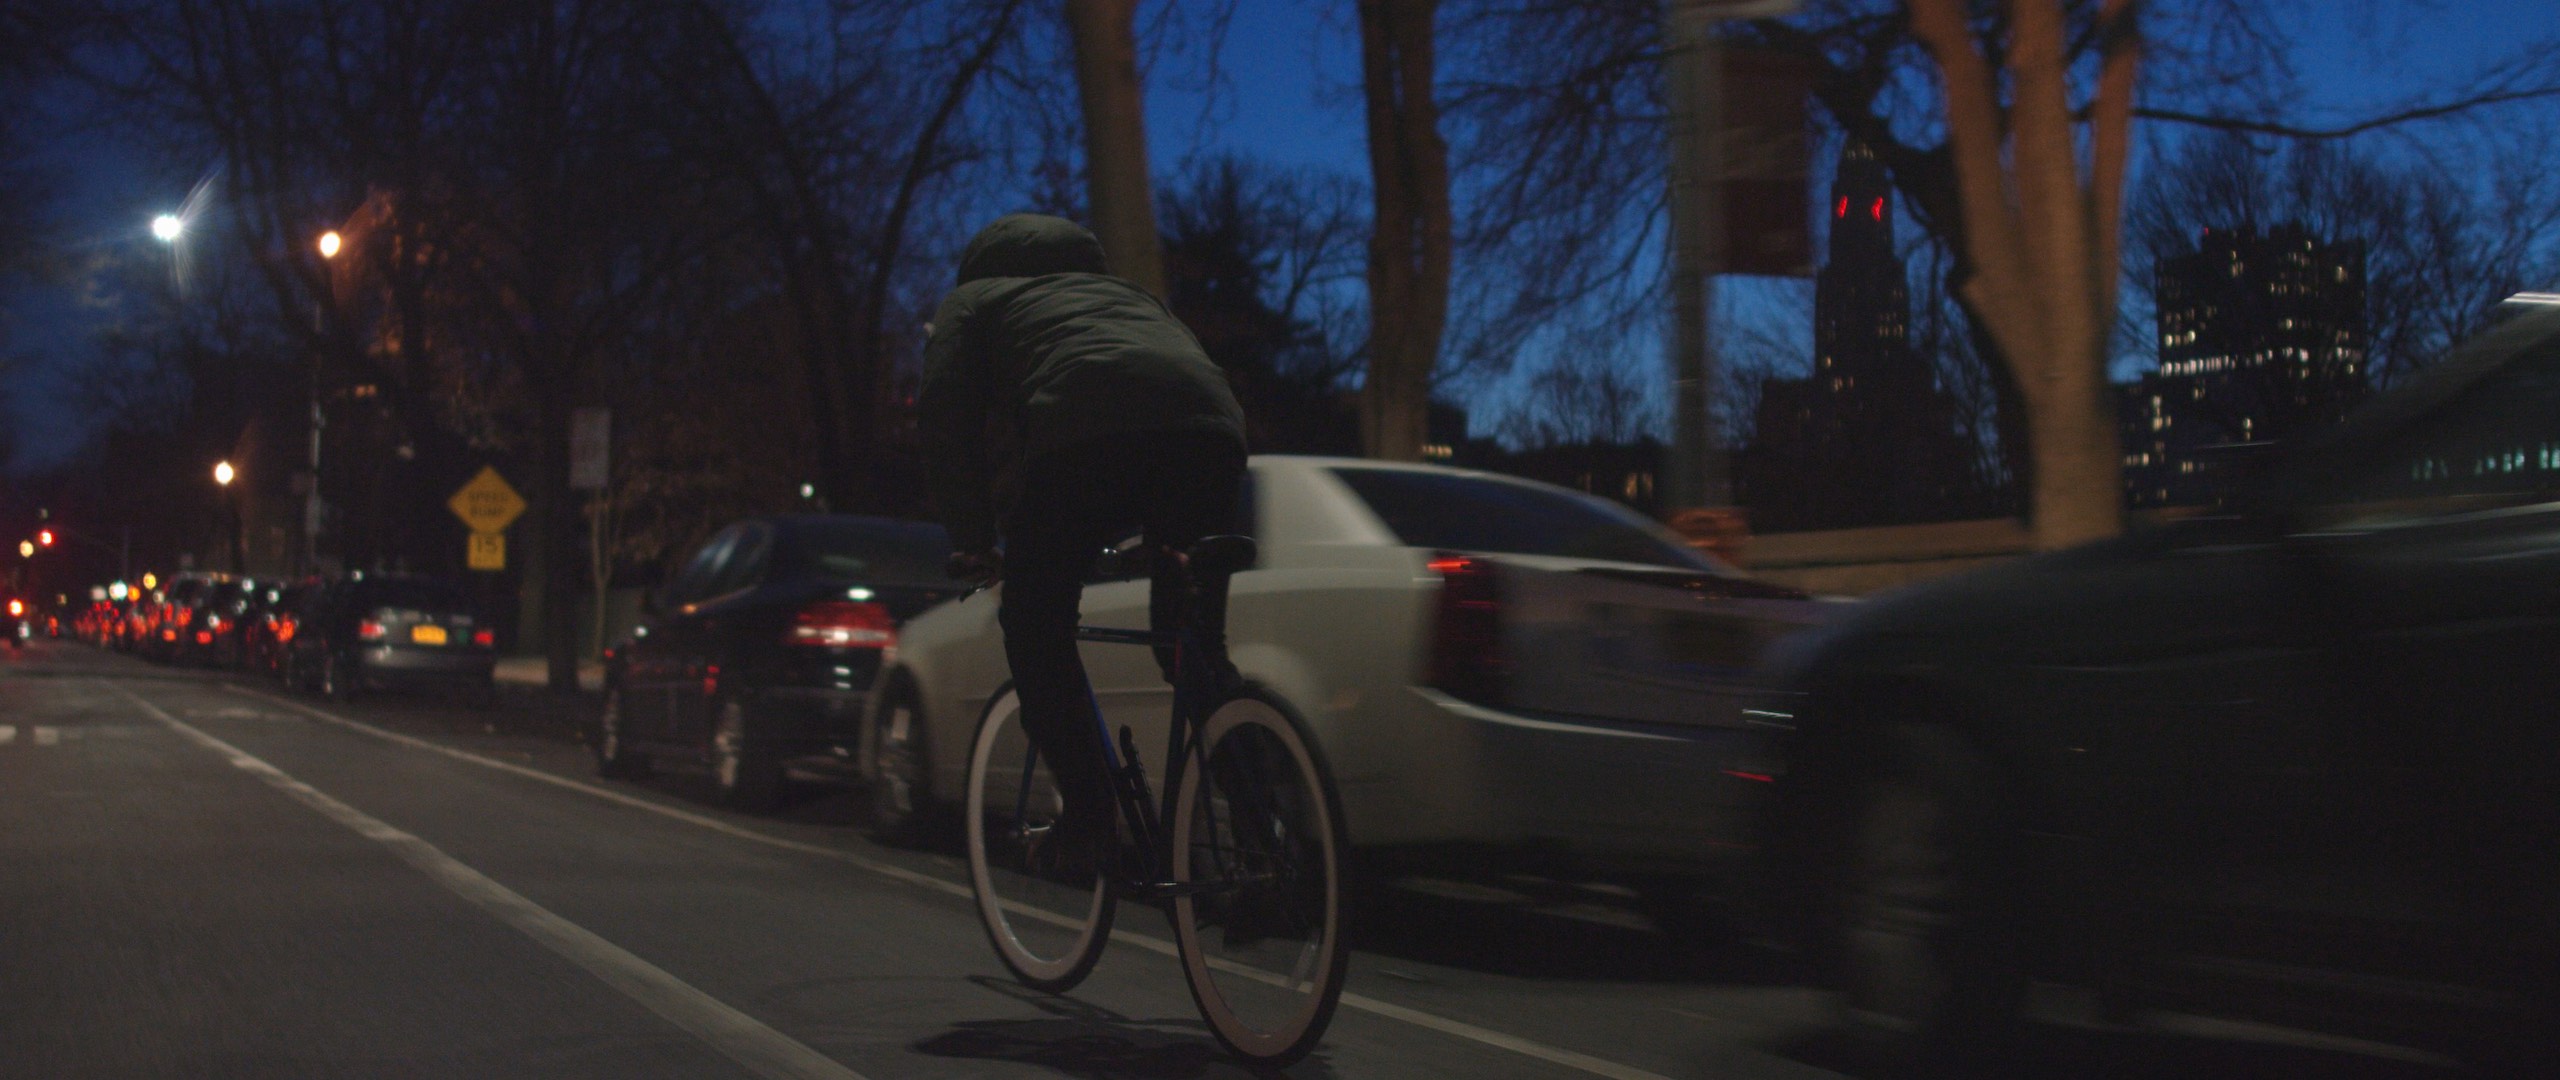 Christmas Eve Film C&I Studios View from behind of person on bicycle with white rimmed wheels biking down the street past cars at dusk